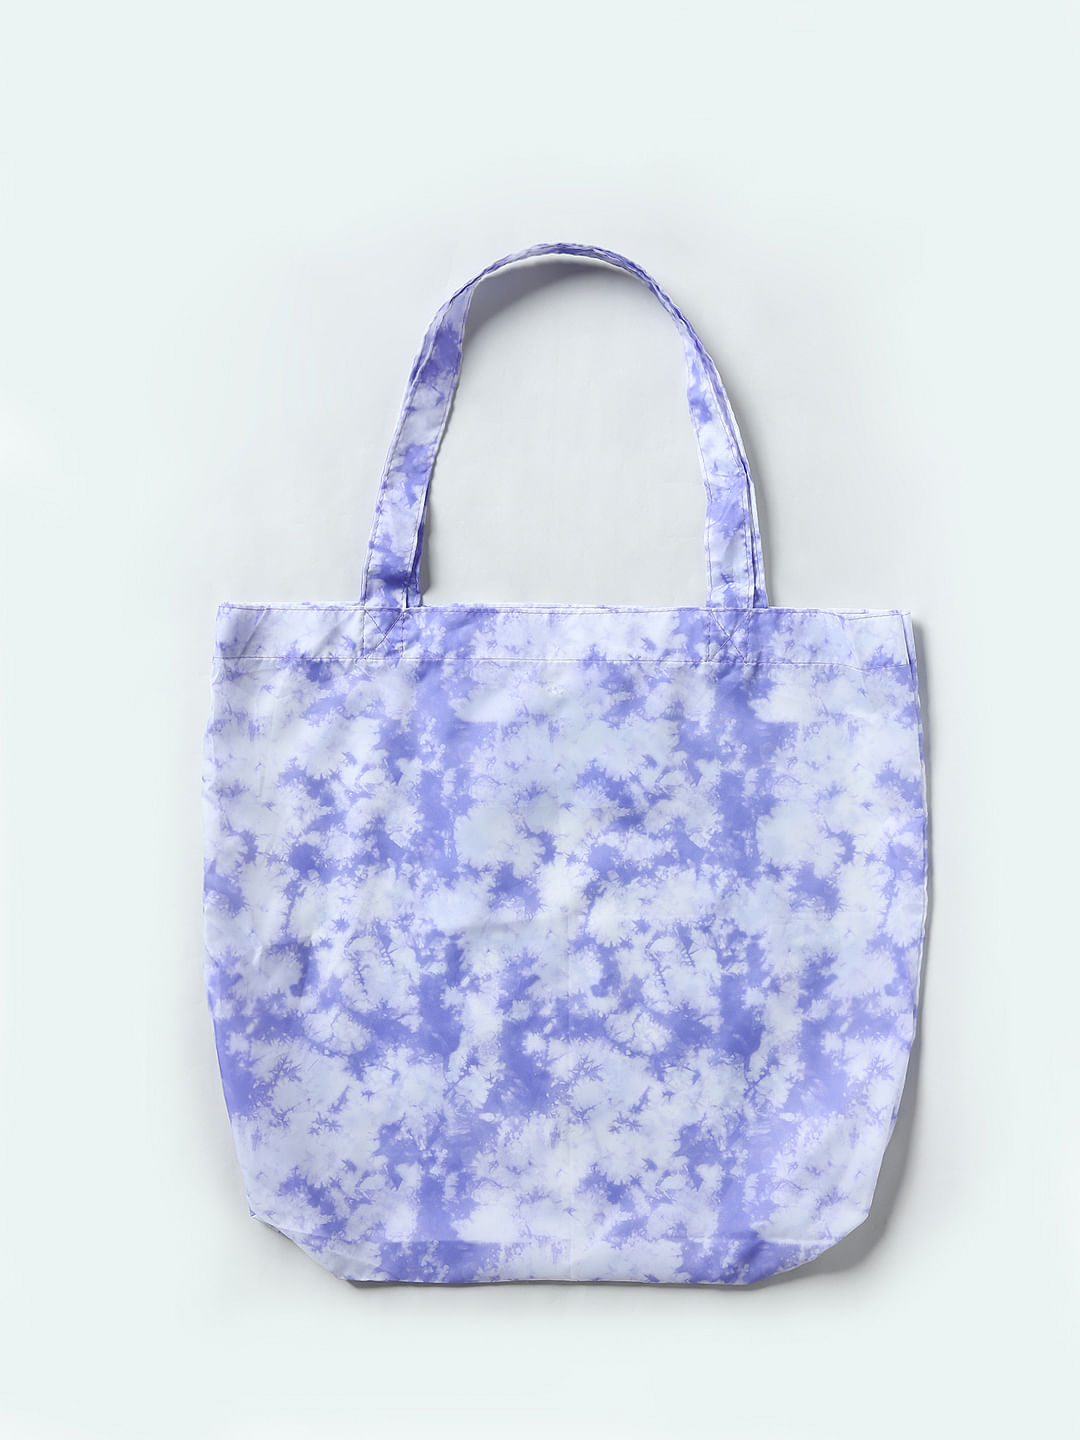 Best Types of TieDye  How to TieDye a Tote Bag